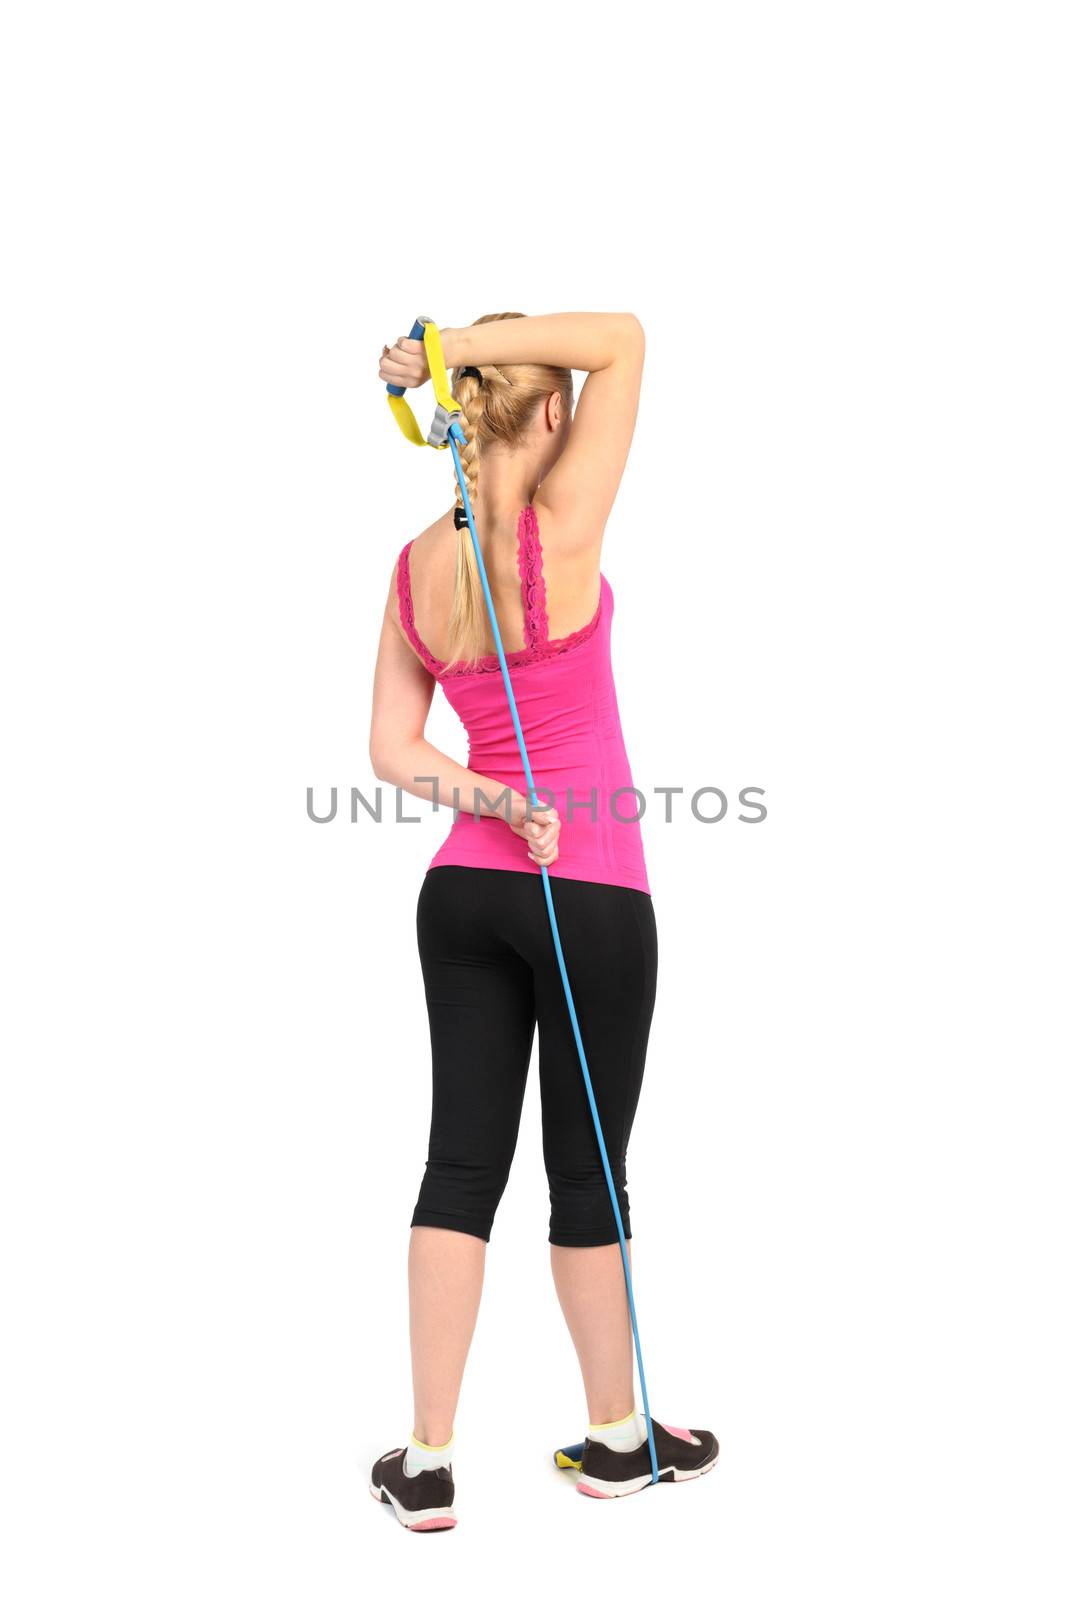 triceps extention exercise using rubber resistance band. position 1 of 2.